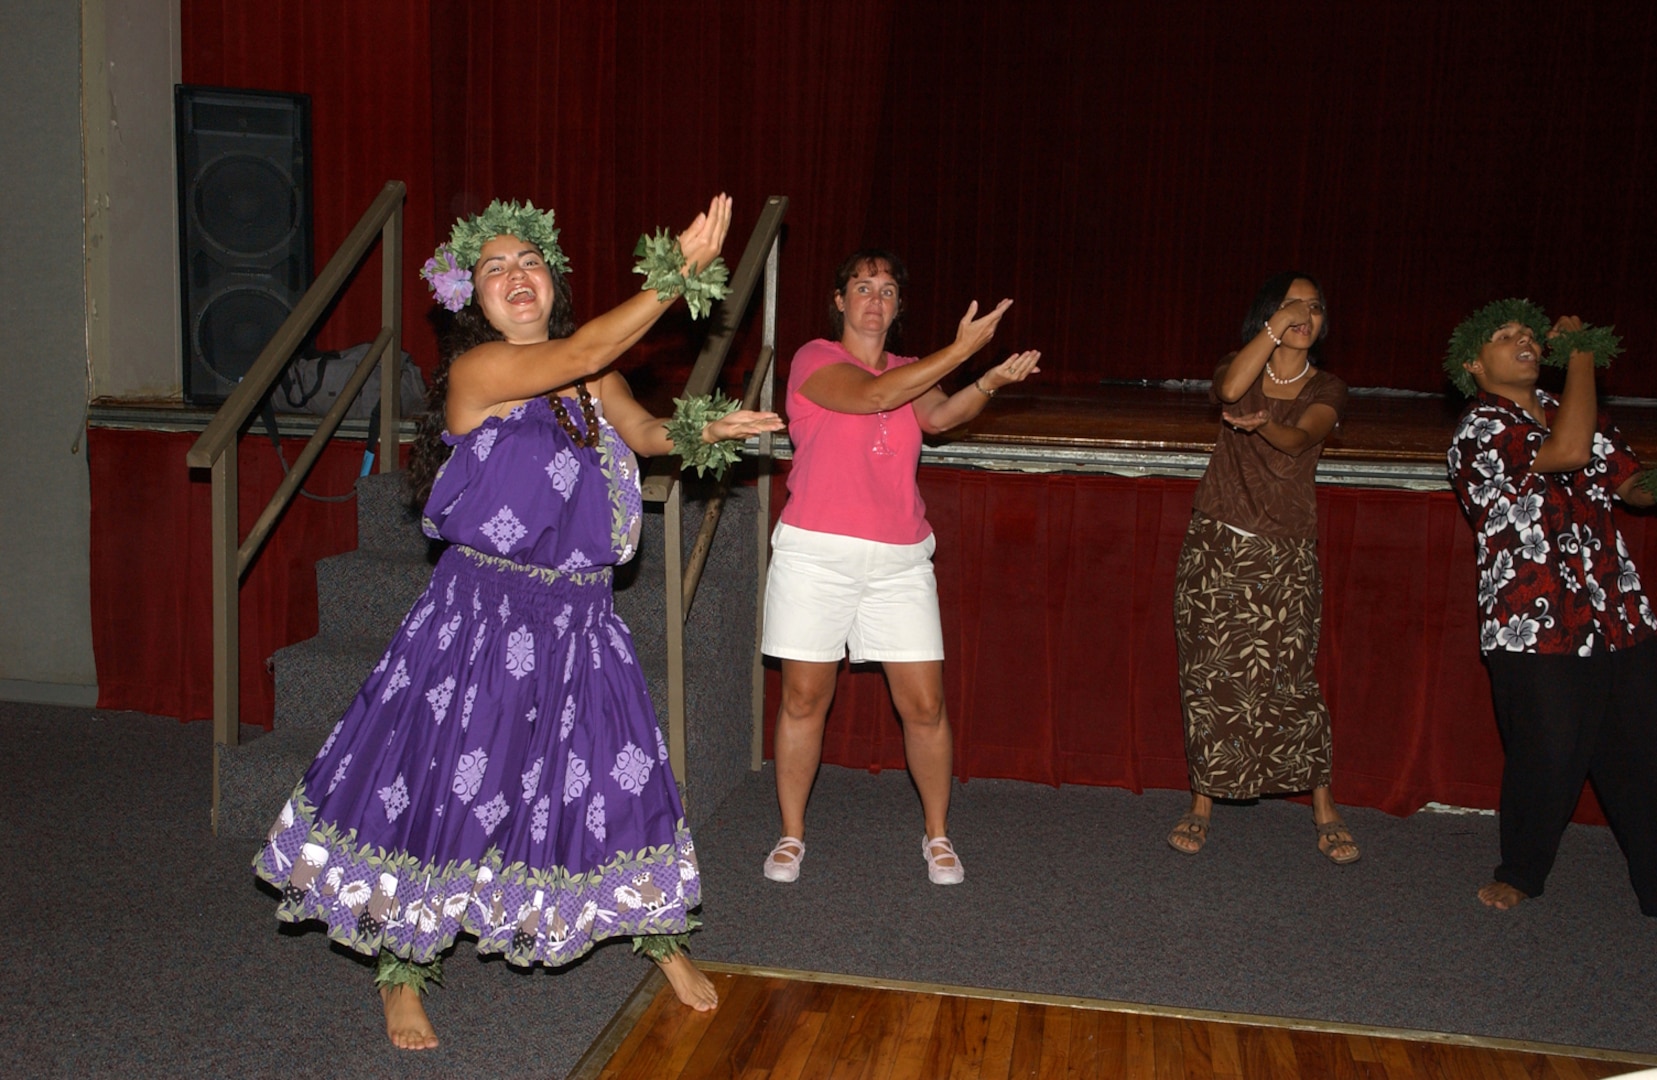 Janet Rodriguez from the Hula Hulao Ohana Eikapeka dance troupe demonstrates the Hukilau (fish with a net) during one of  the many performances held at Arnold Hall during the International Folk Festival Aug. 25, 2007, at Lackland AFB, Texas. (USAF photo by Alan Boedeker)                               